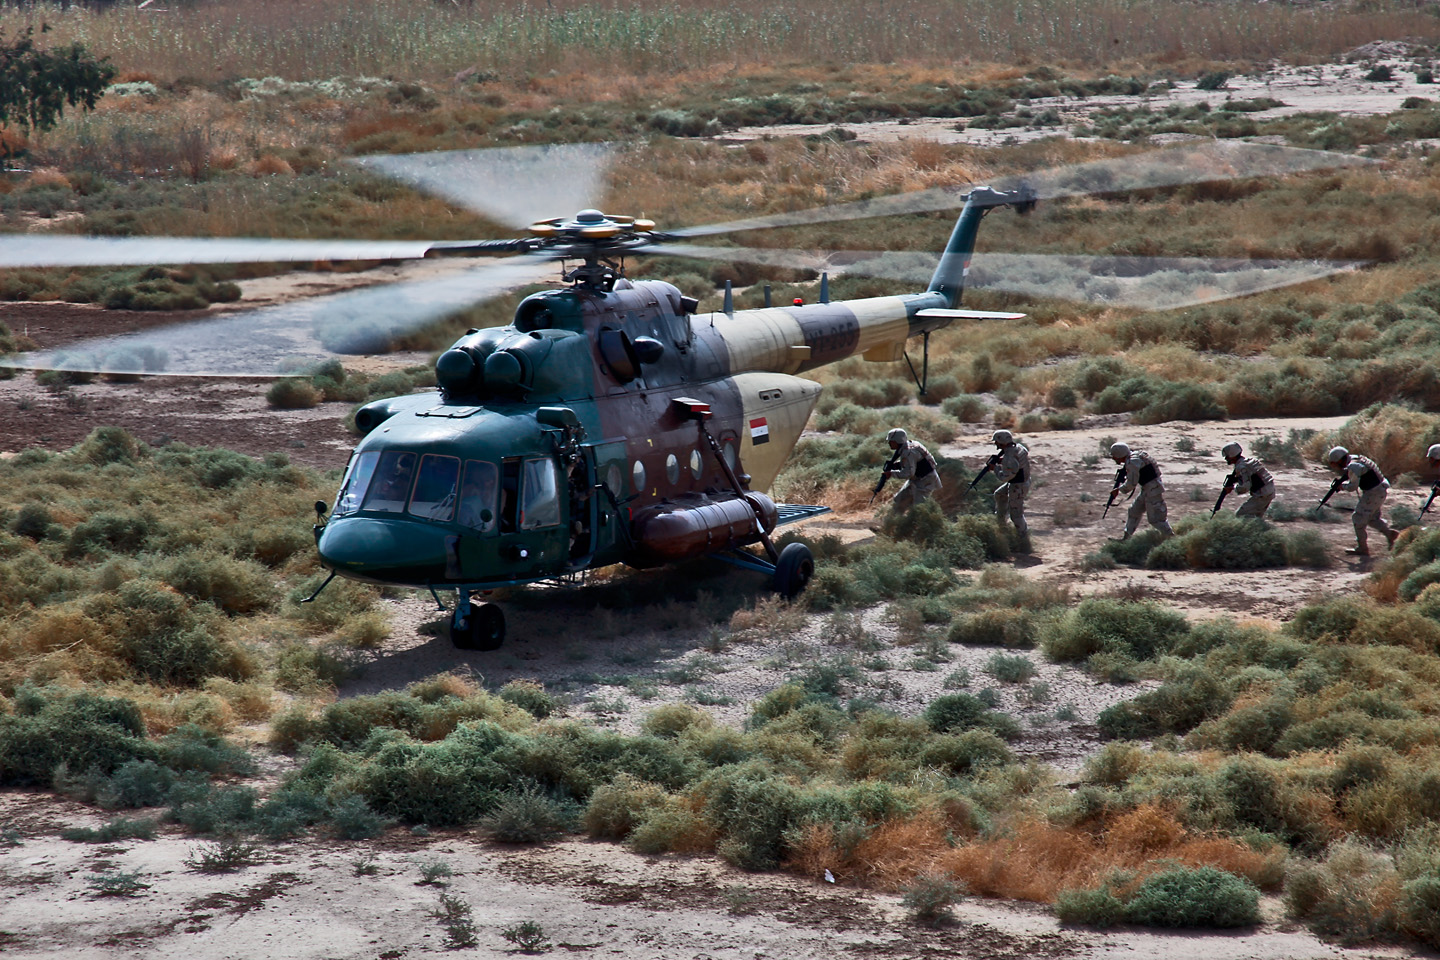 US_Army_53453_CAMP_TAJI,_Iraq-After_securing_their_simulated_target,_Iraqi_Soldiers_make_their_way_back_onto_an_Iraqi_Air_Force_MI-17_Hip_helicopter._U.S._Soldiers_from_the_1st_Air_Cavalry_Brigade,_1st_Cavalry_Div.jpg